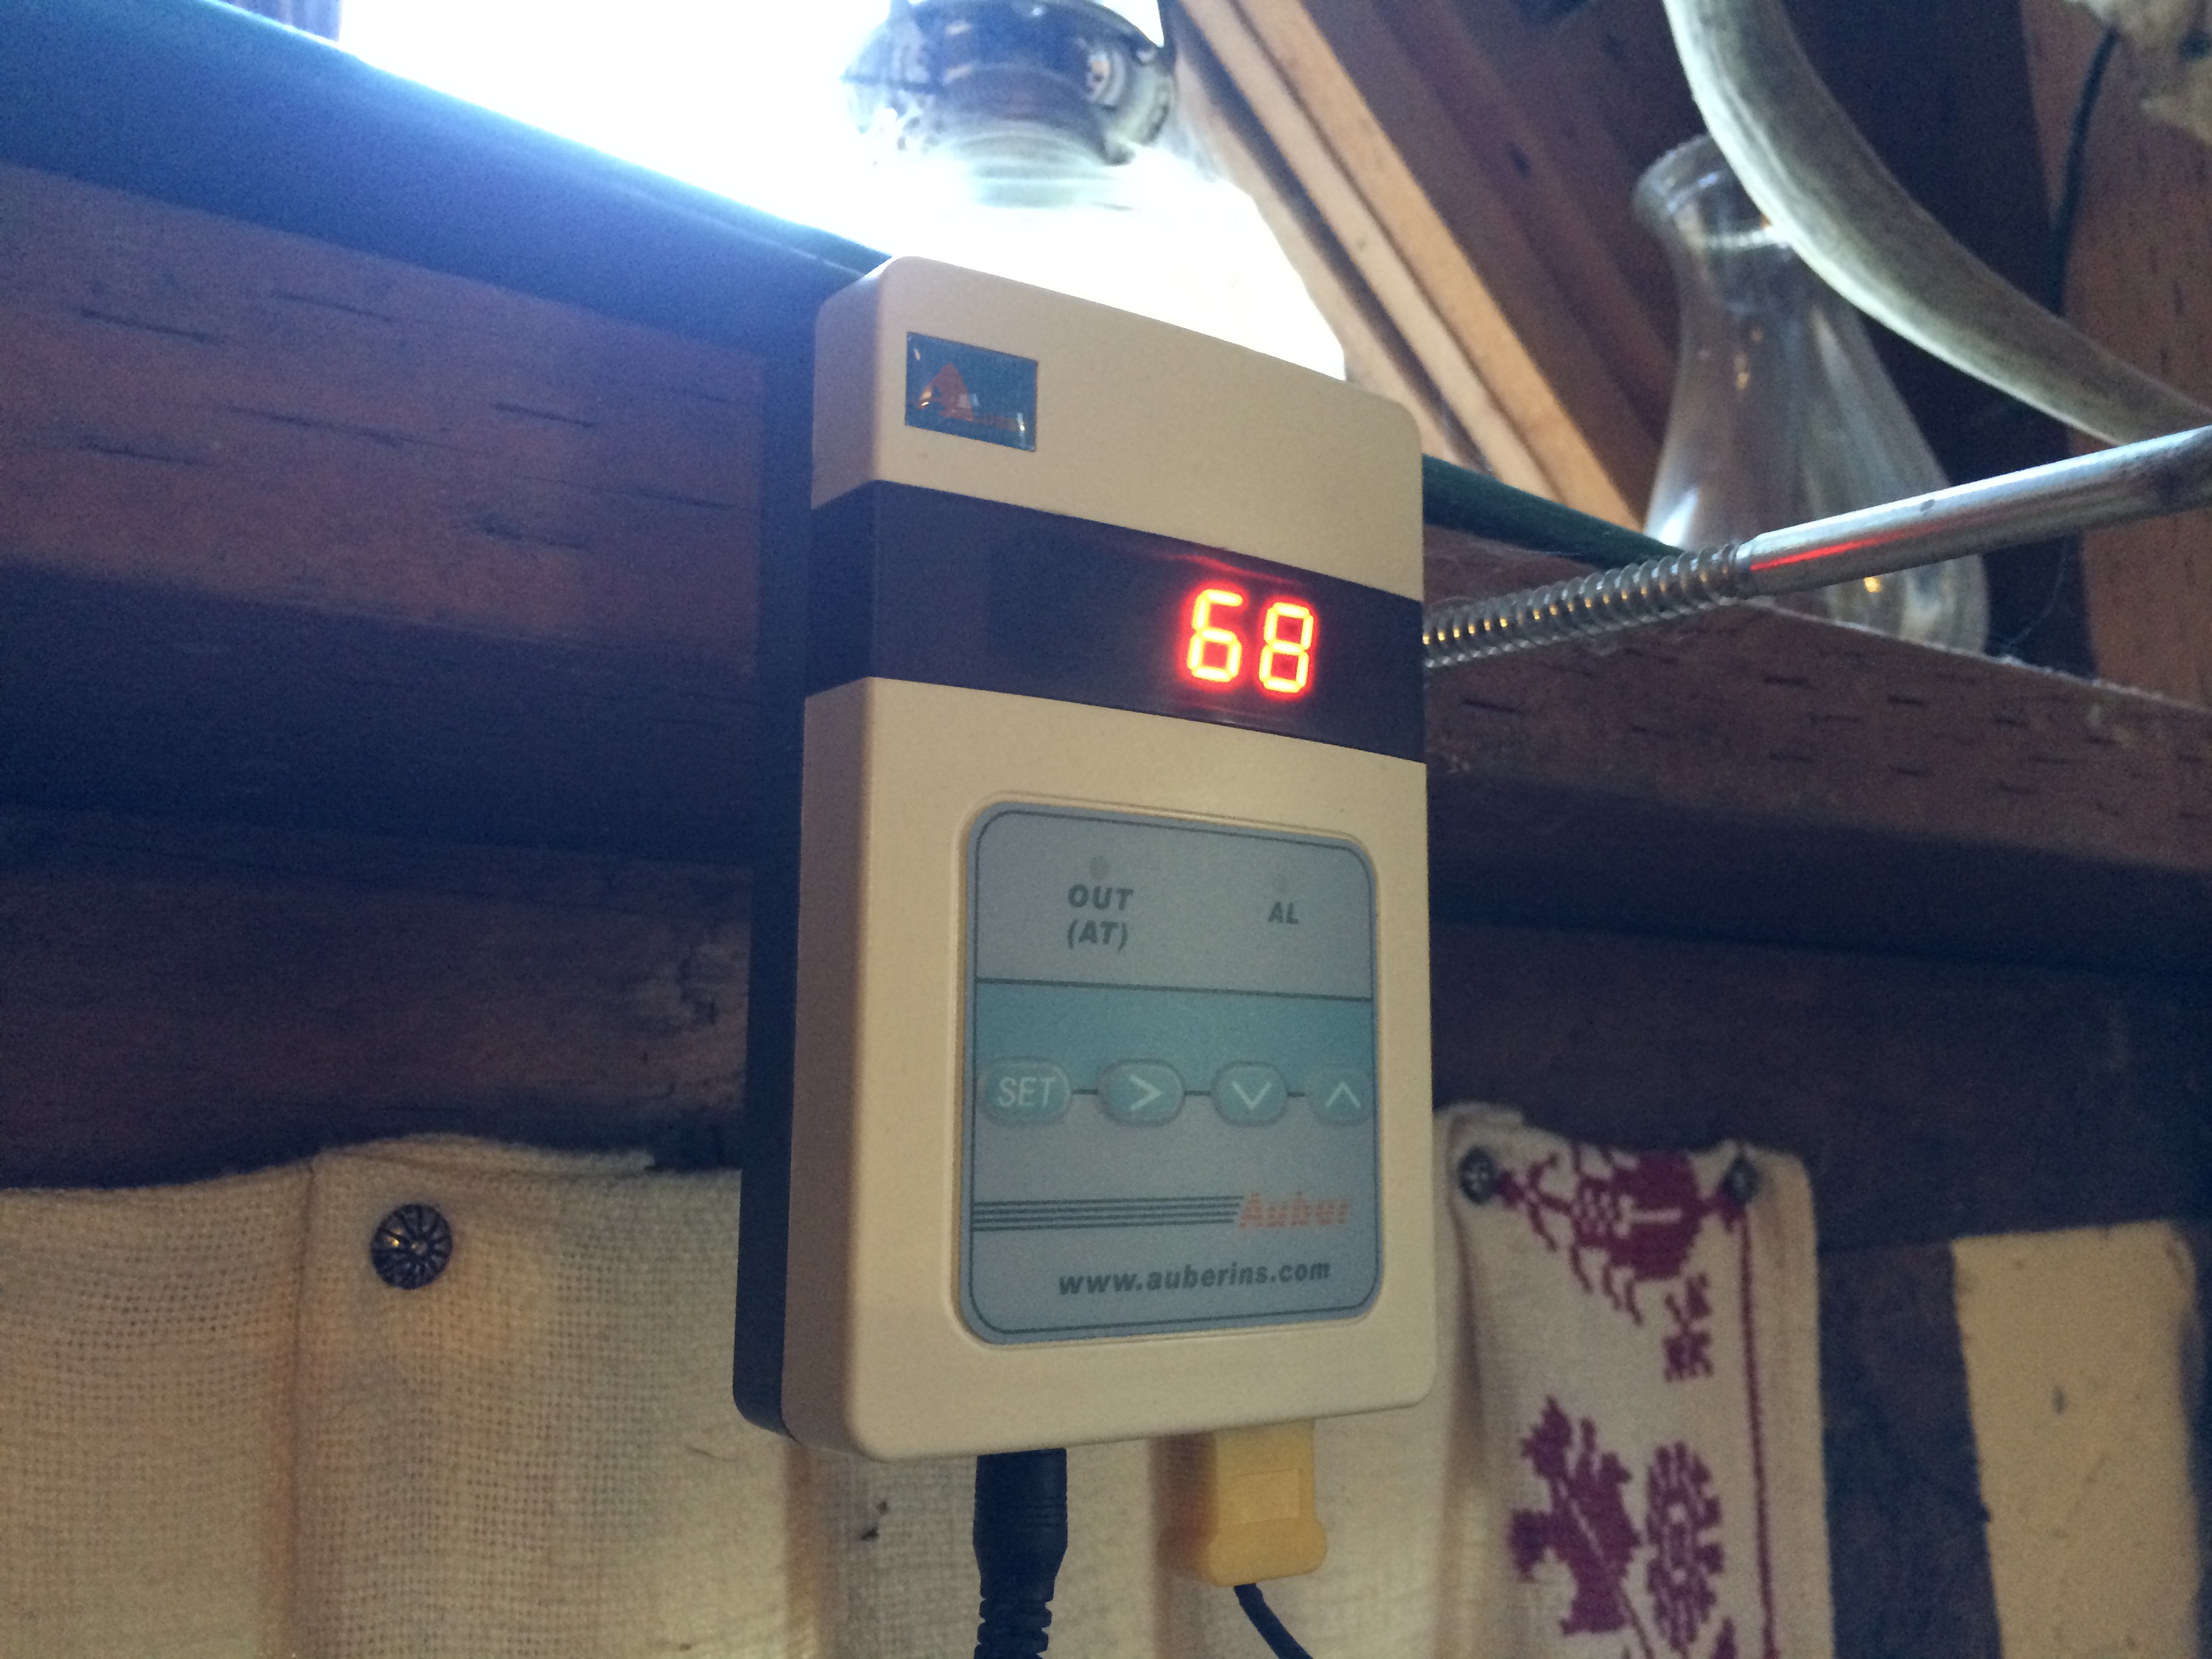 Wood Stove Probe Thermometer for Double Wall Flue Pipe – Midwest